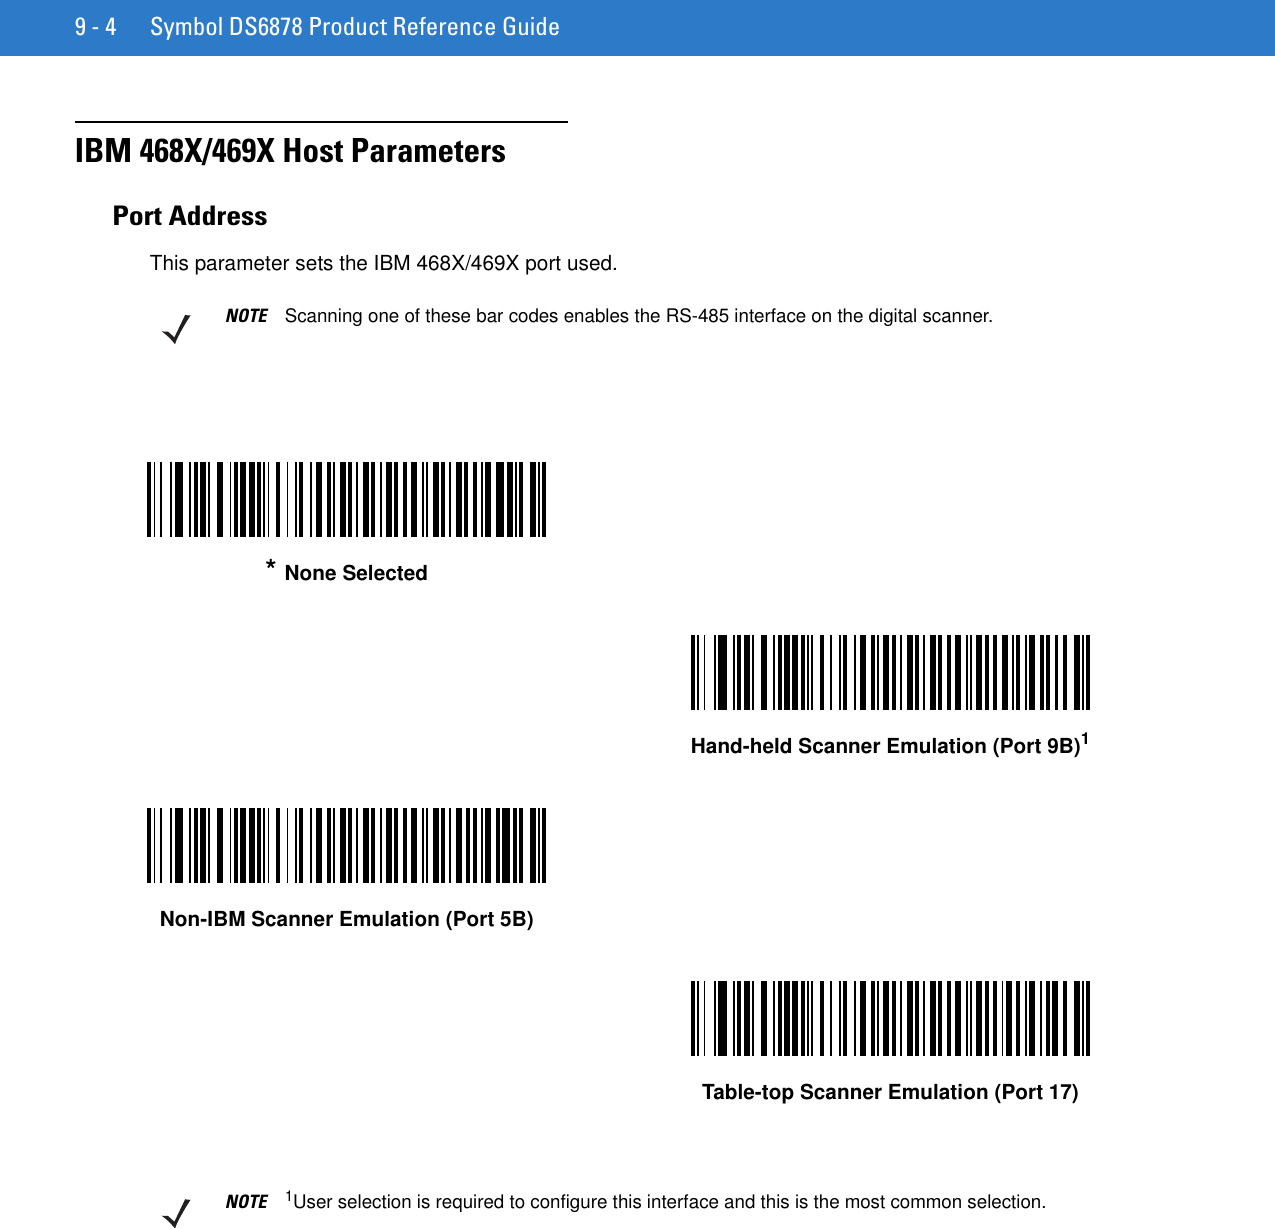 9 - 4 Symbol DS6878 Product Reference GuideIBM 468X/469X Host ParametersPort AddressThis parameter sets the IBM 468X/469X port used.NOTE Scanning one of these bar codes enables the RS-485 interface on the digital scanner.* None SelectedHand-held Scanner Emulation (Port 9B)1Non-IBM Scanner Emulation (Port 5B)Table-top Scanner Emulation (Port 17)NOTE 1User selection is required to configure this interface and this is the most common selection.